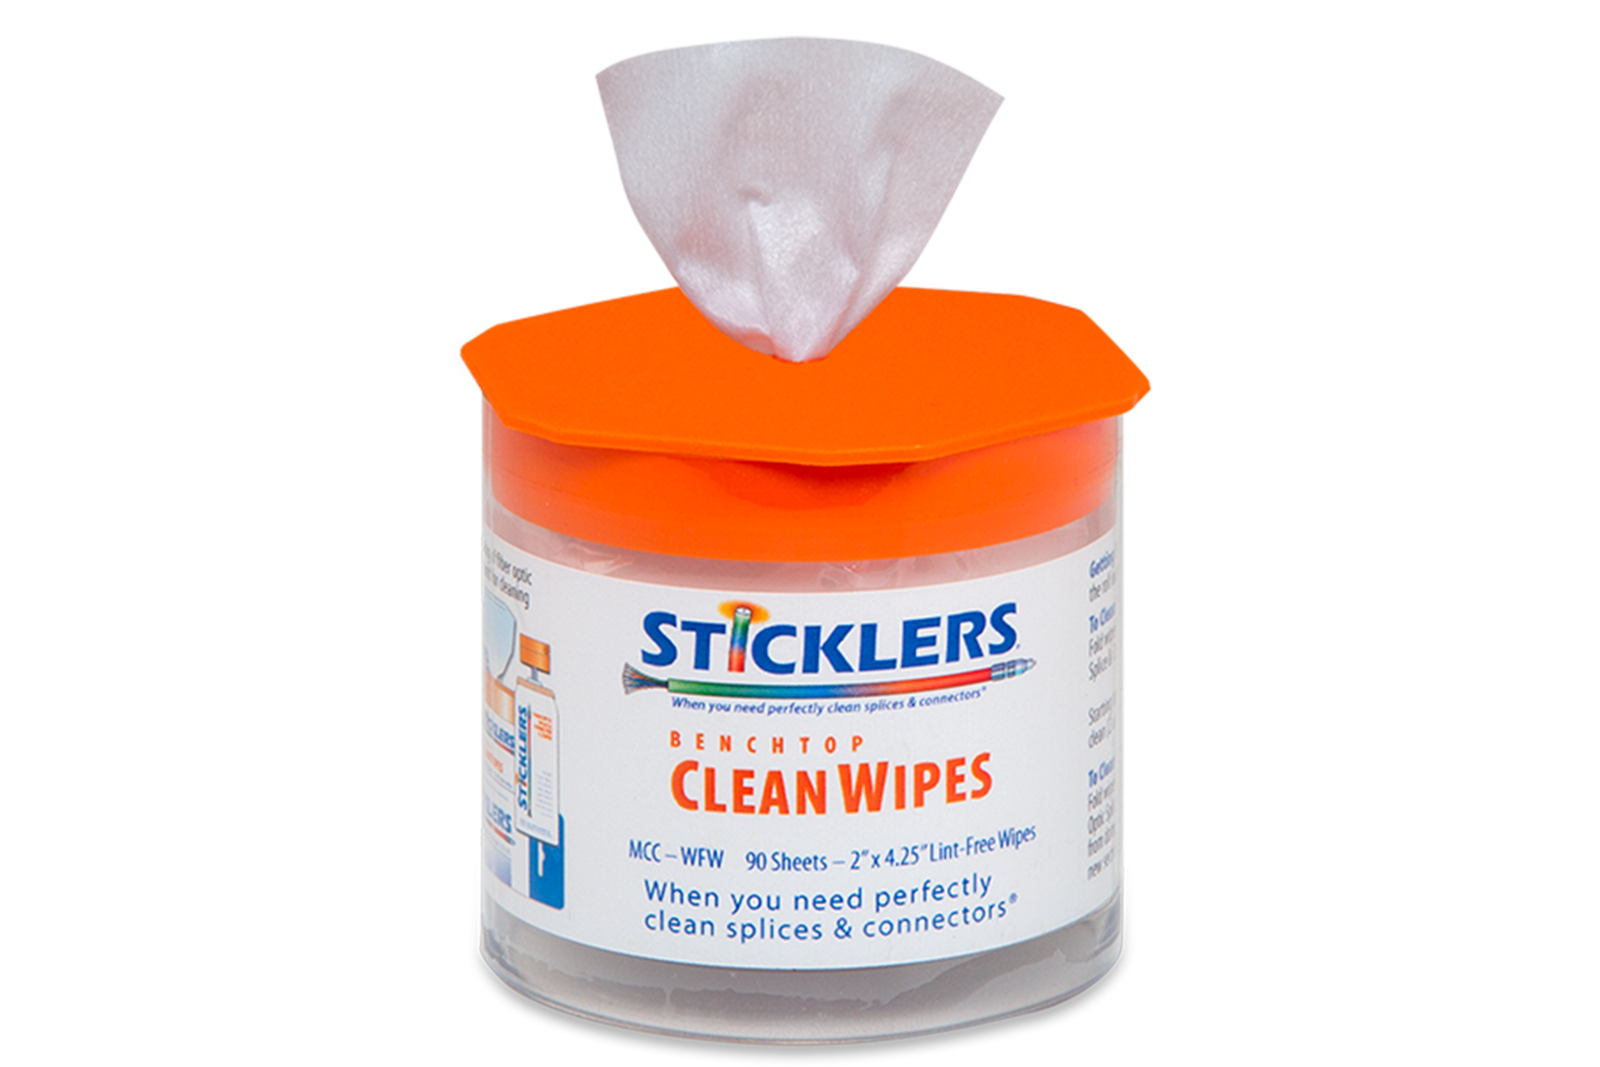 CleanWipes 90 Fiber Optic Wipes for the Benchtop sticklers mcc-wfw